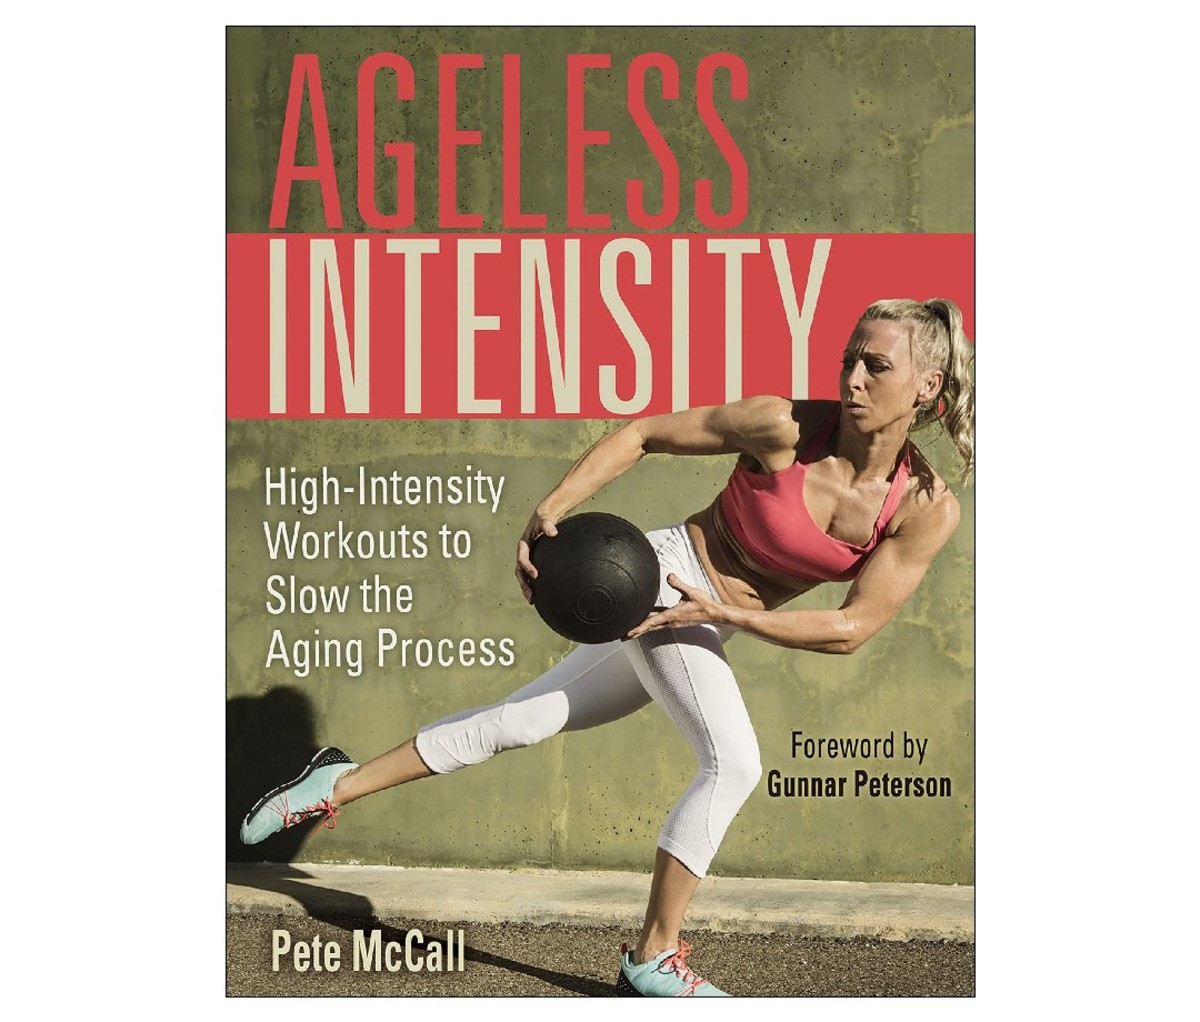 Ageless Intensity: High intensity workouts to slow down the aging process by Pete McCall